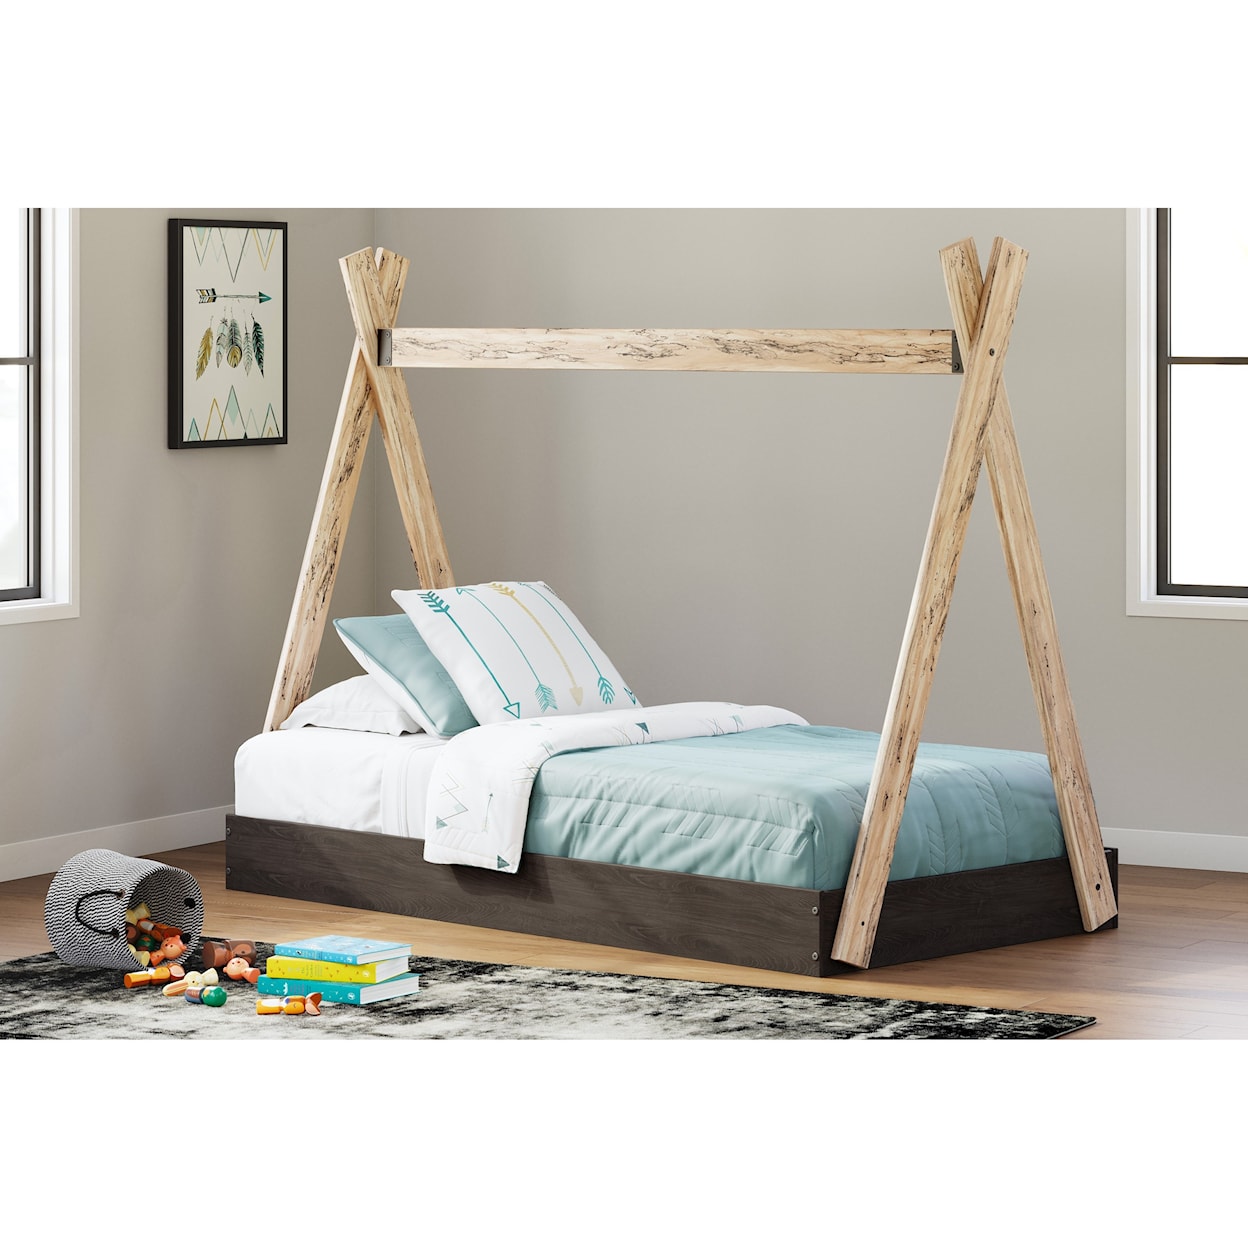 Signature Design by Ashley Piperton Twin Tent Bed